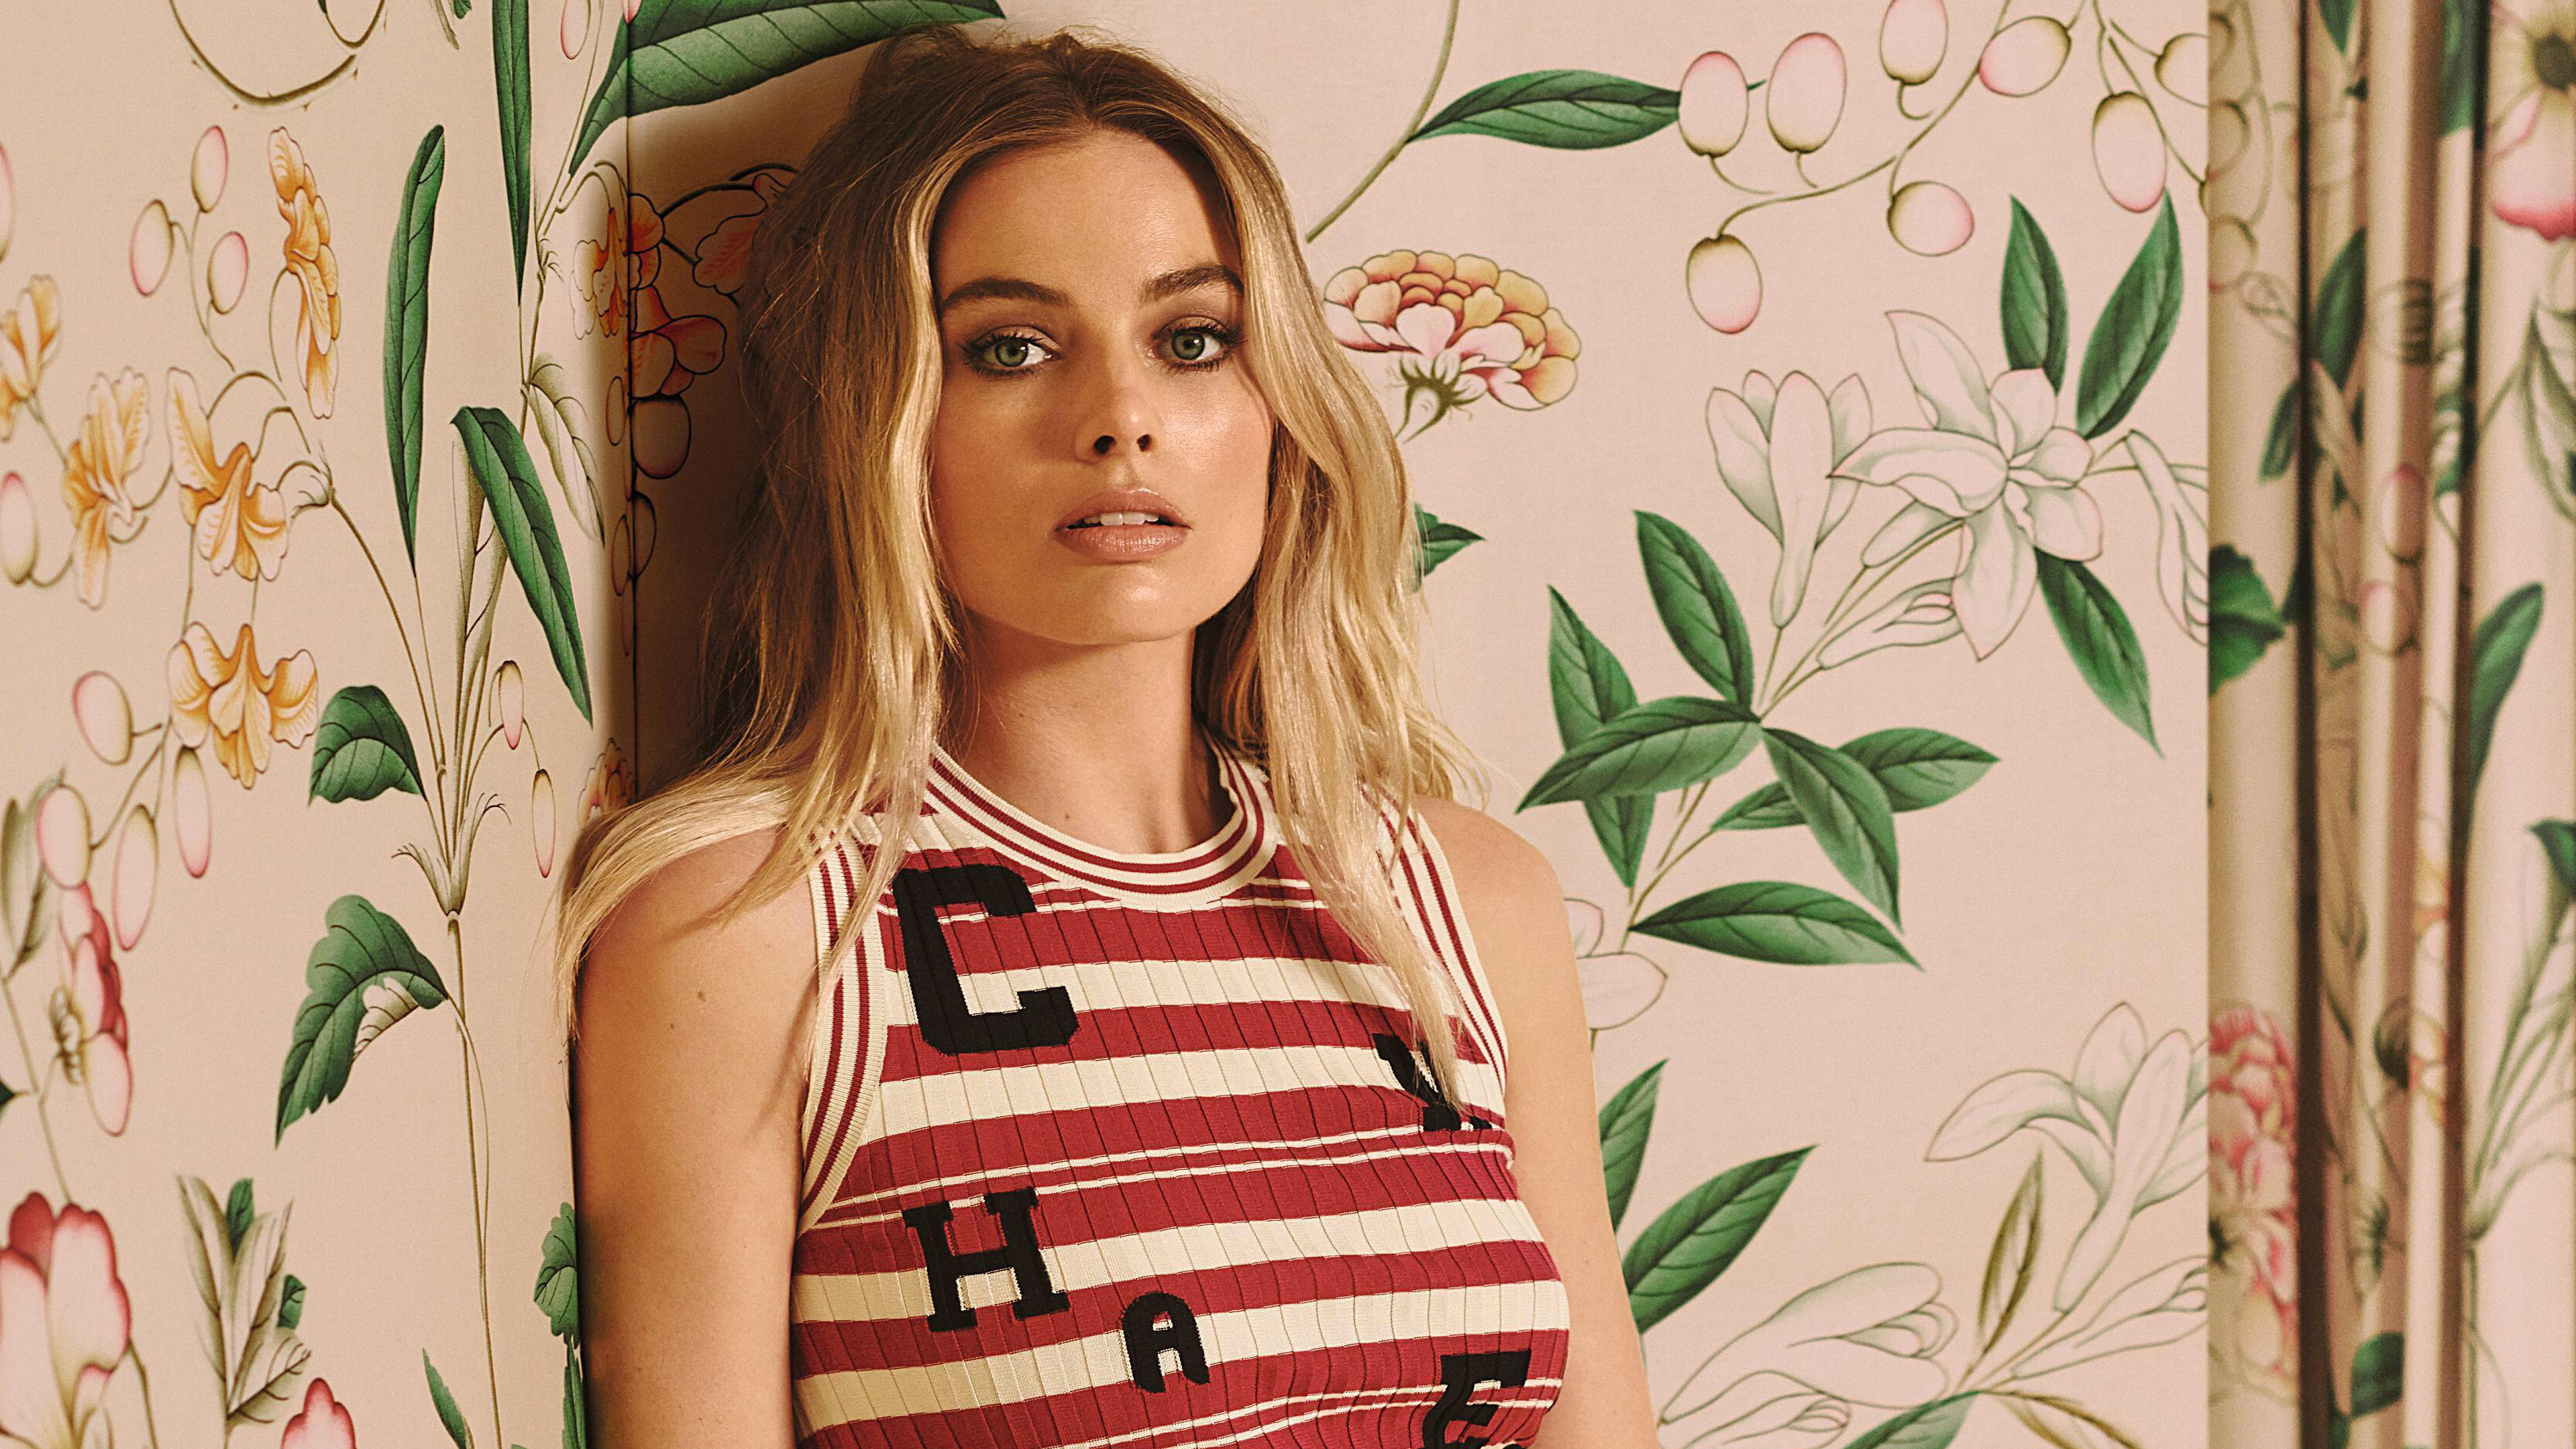 Margot Robbie: collaborated with Domhnall Gleeson in Simon Curtis' Goodbye Christopher Robin, 2017, a biographical drama about the lives of Winnie-the-Pooh creator A. A. Milne and his family. 3840x2160 4K Background.